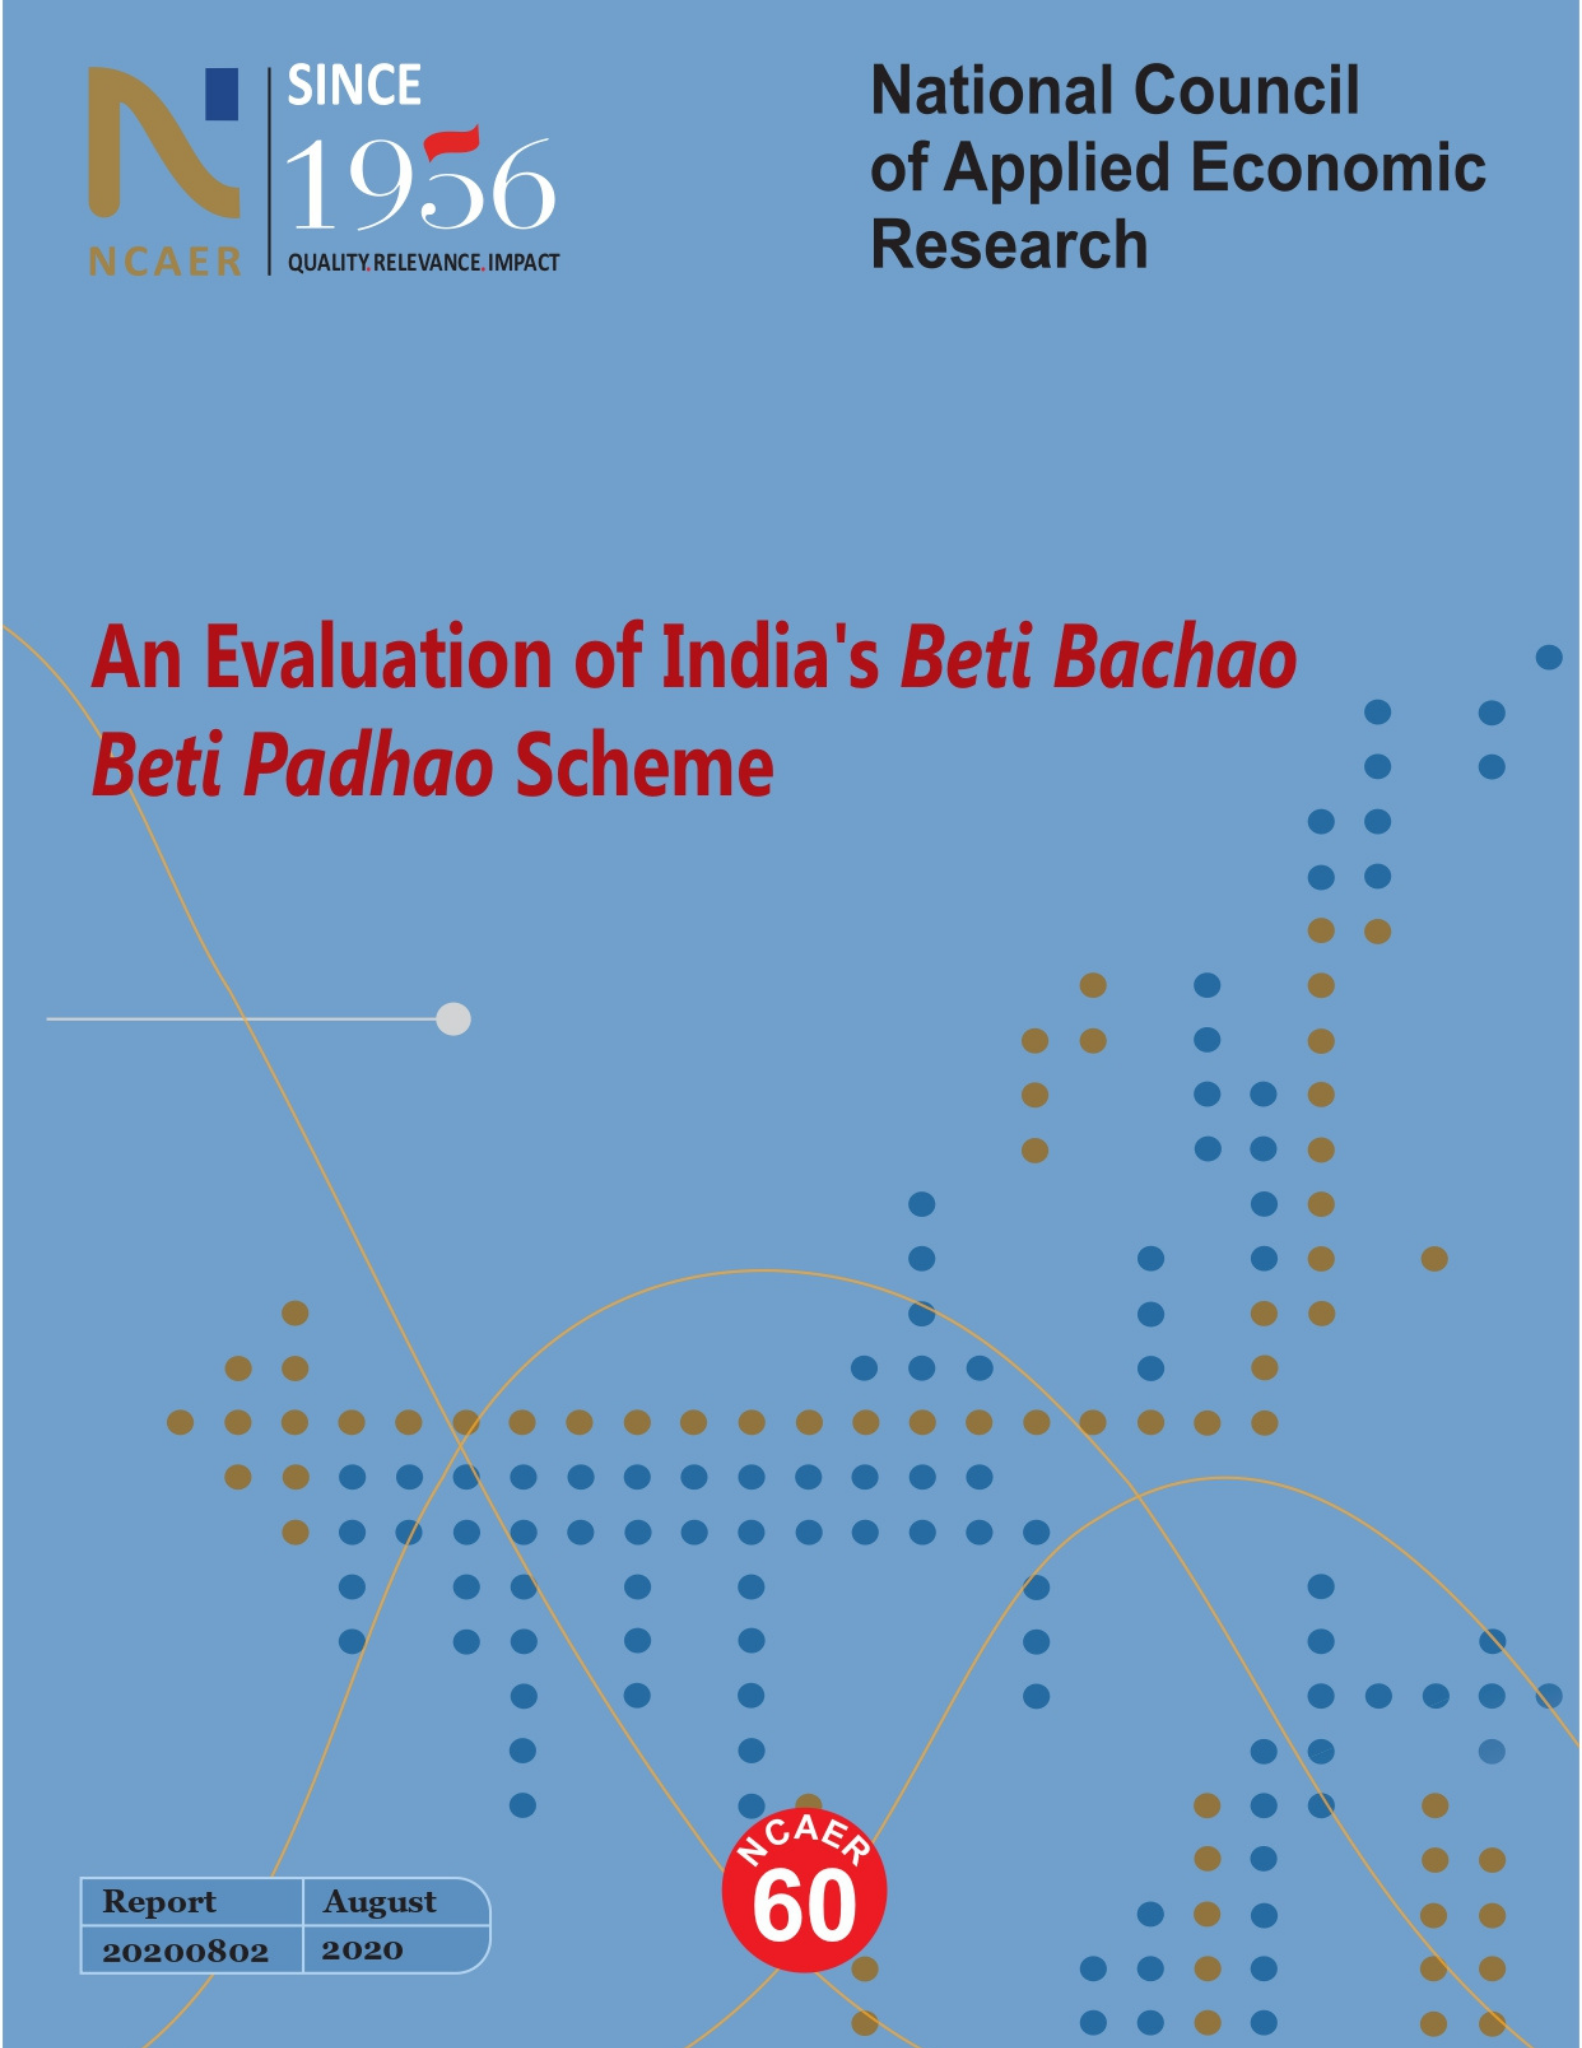 An Evaluation of India’s Beti Bachao Beti Padhao Scheme